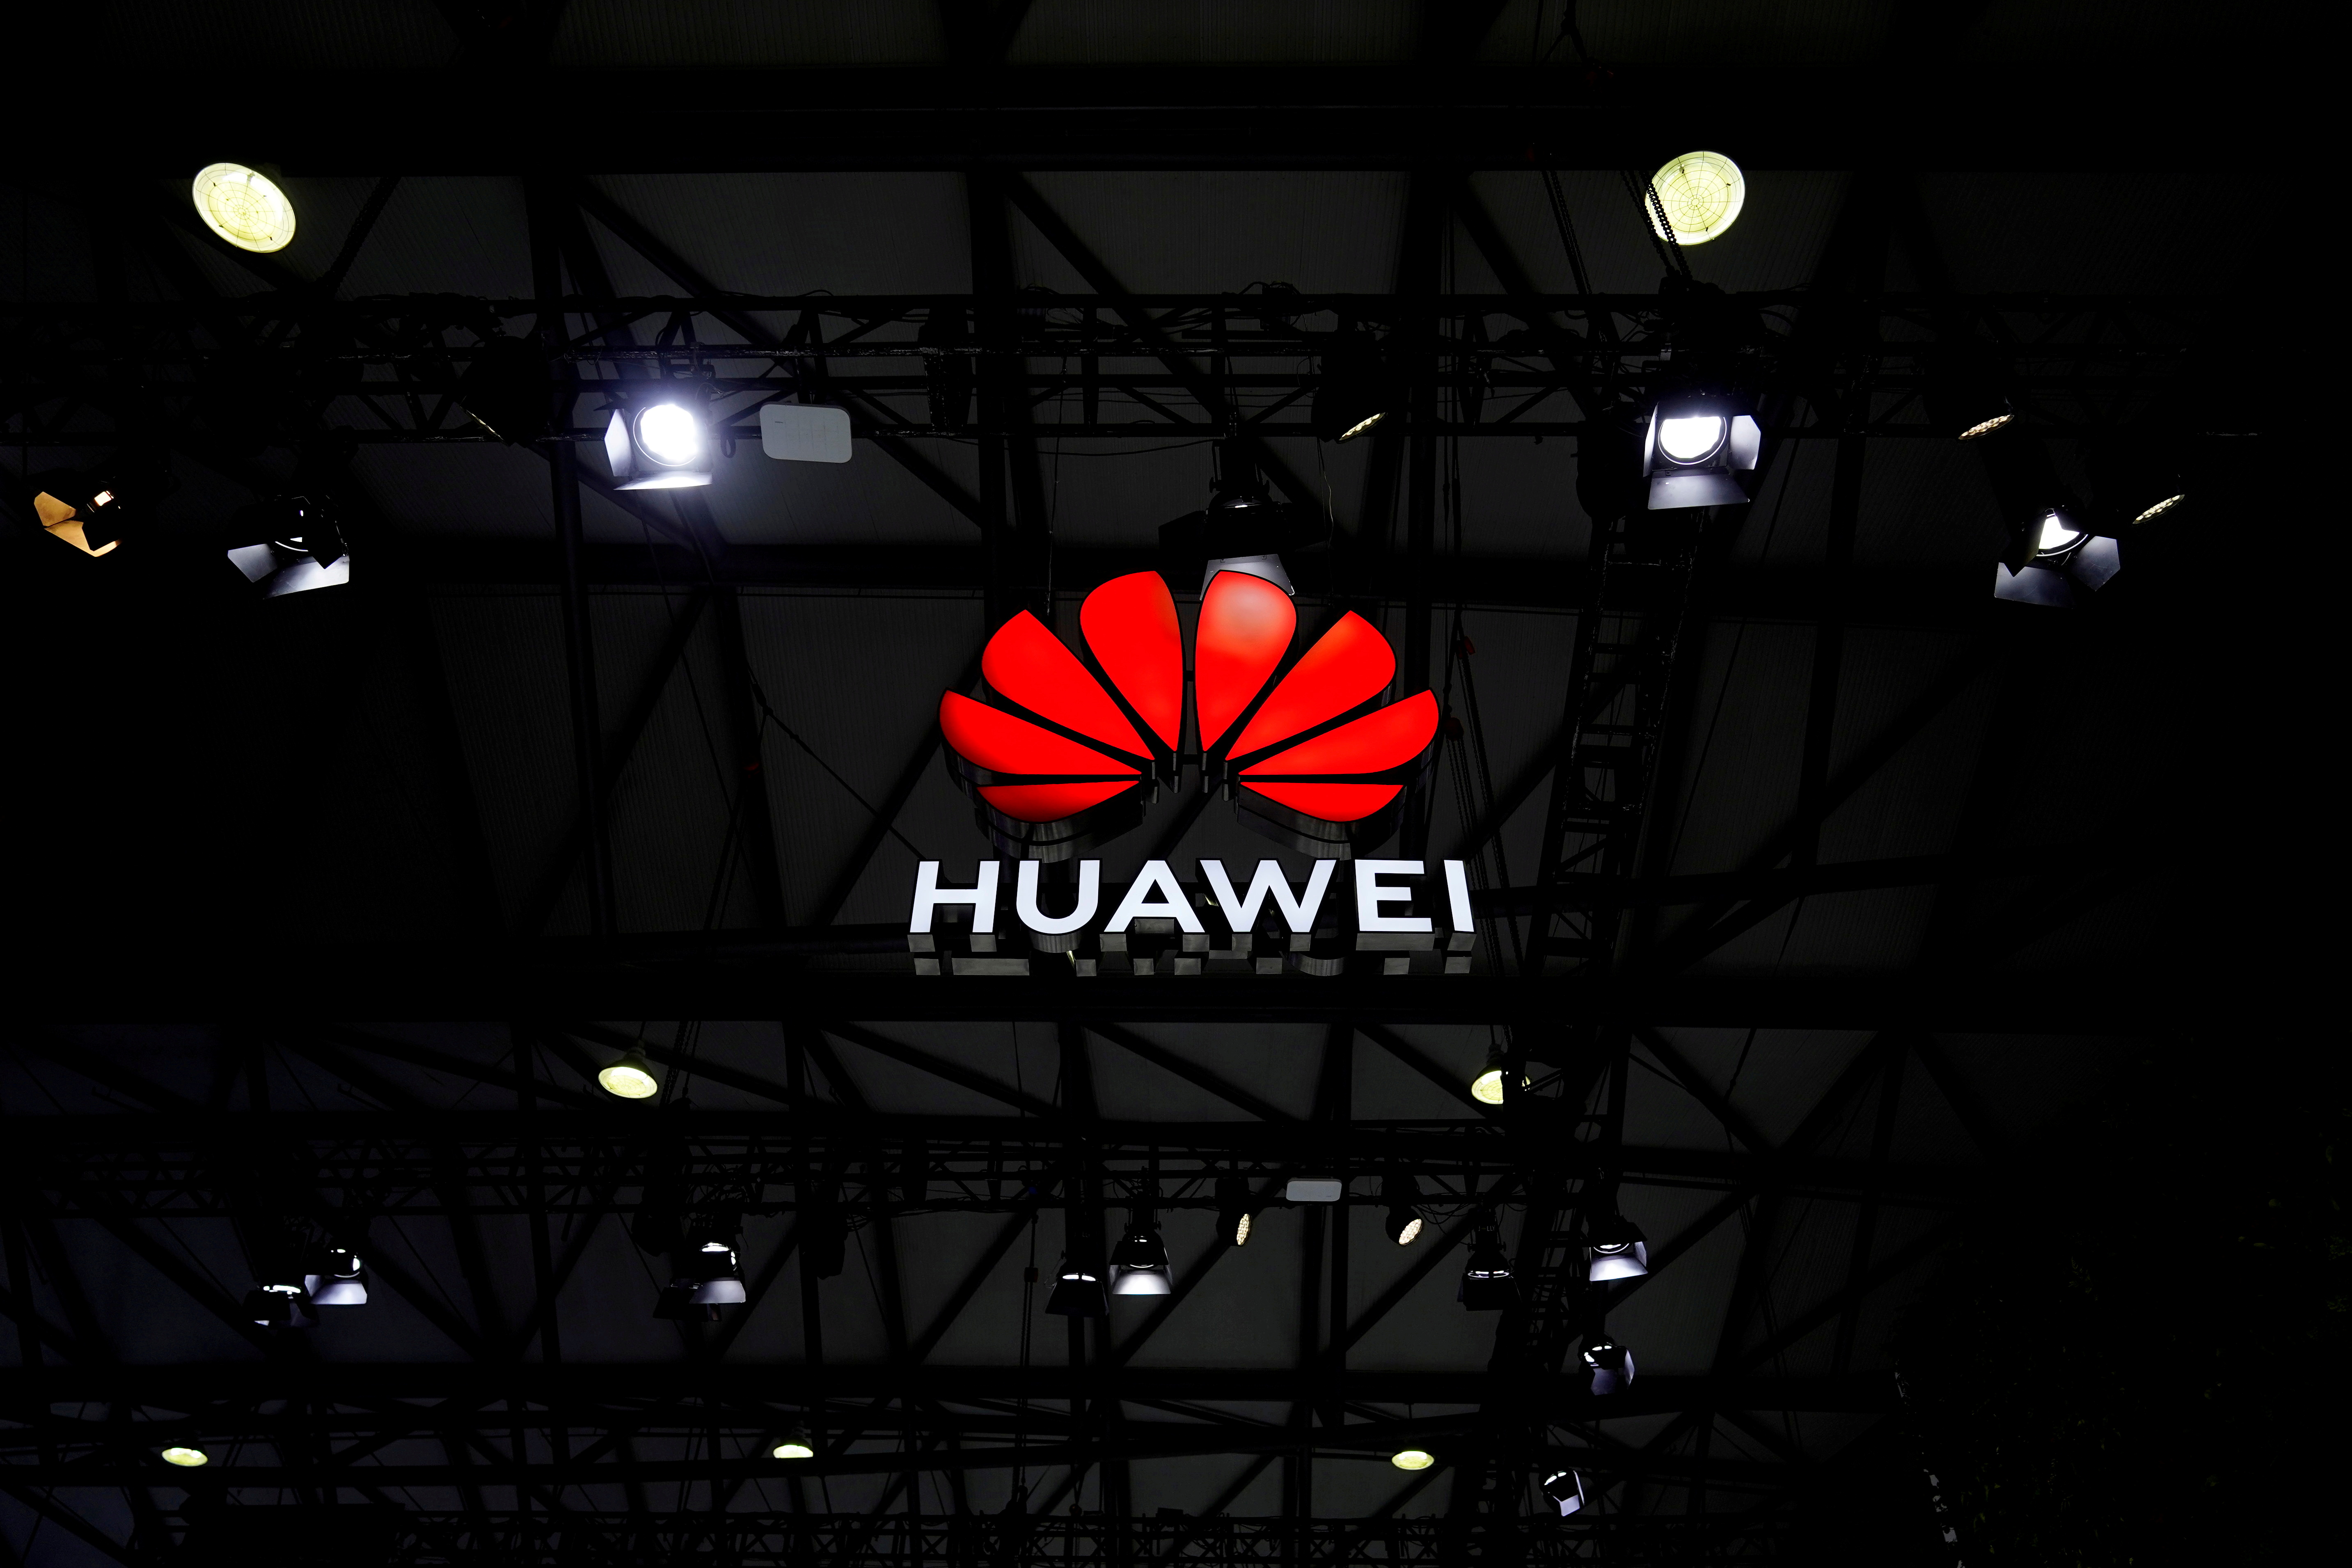 Mobile World Congress (MWC) in Shanghai